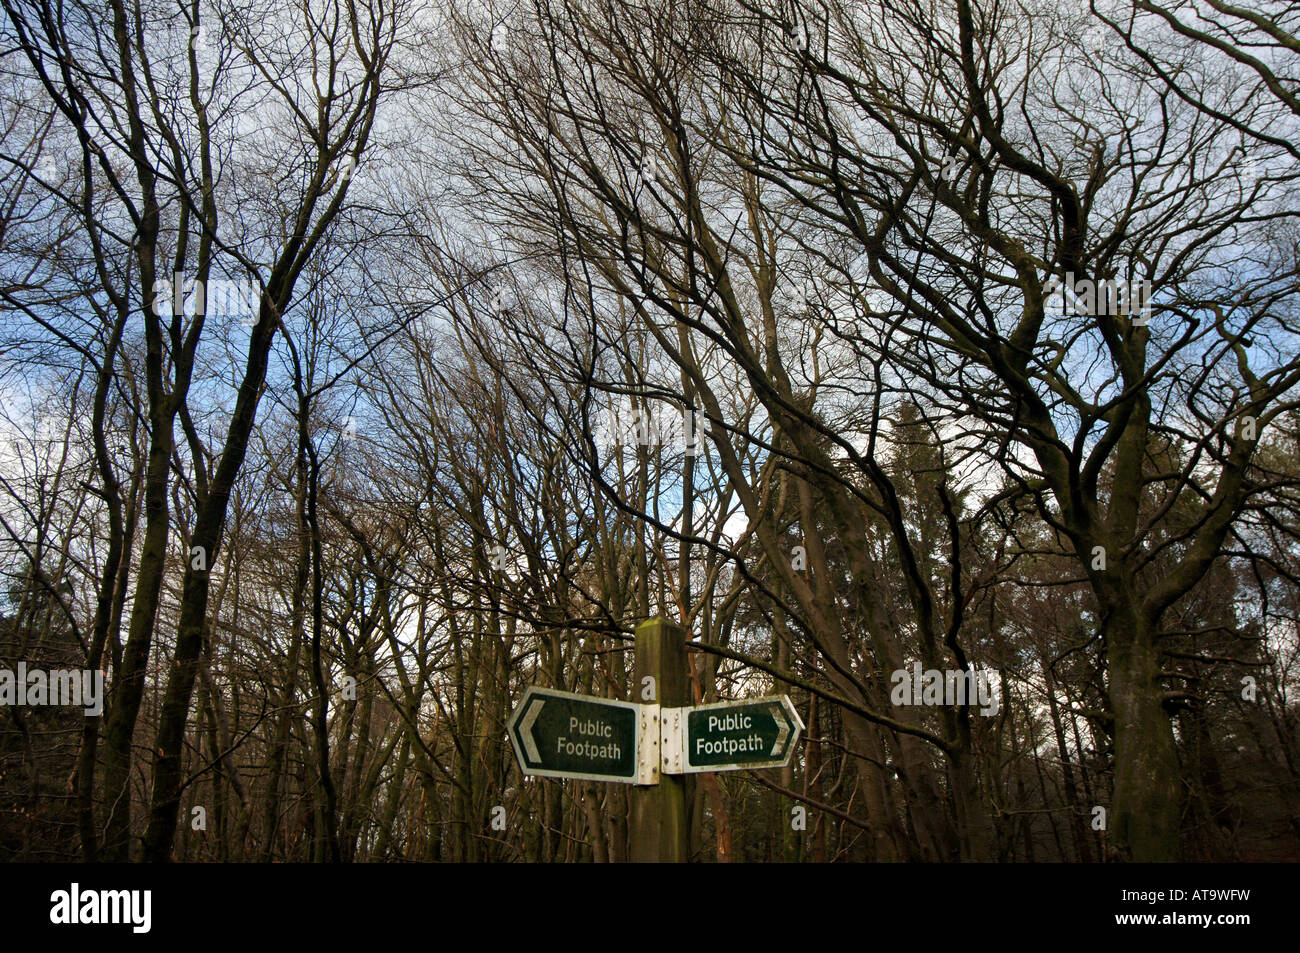 A public footpath sign pointing in opposite directions along a forest path in Devon, UK. Stock Photo